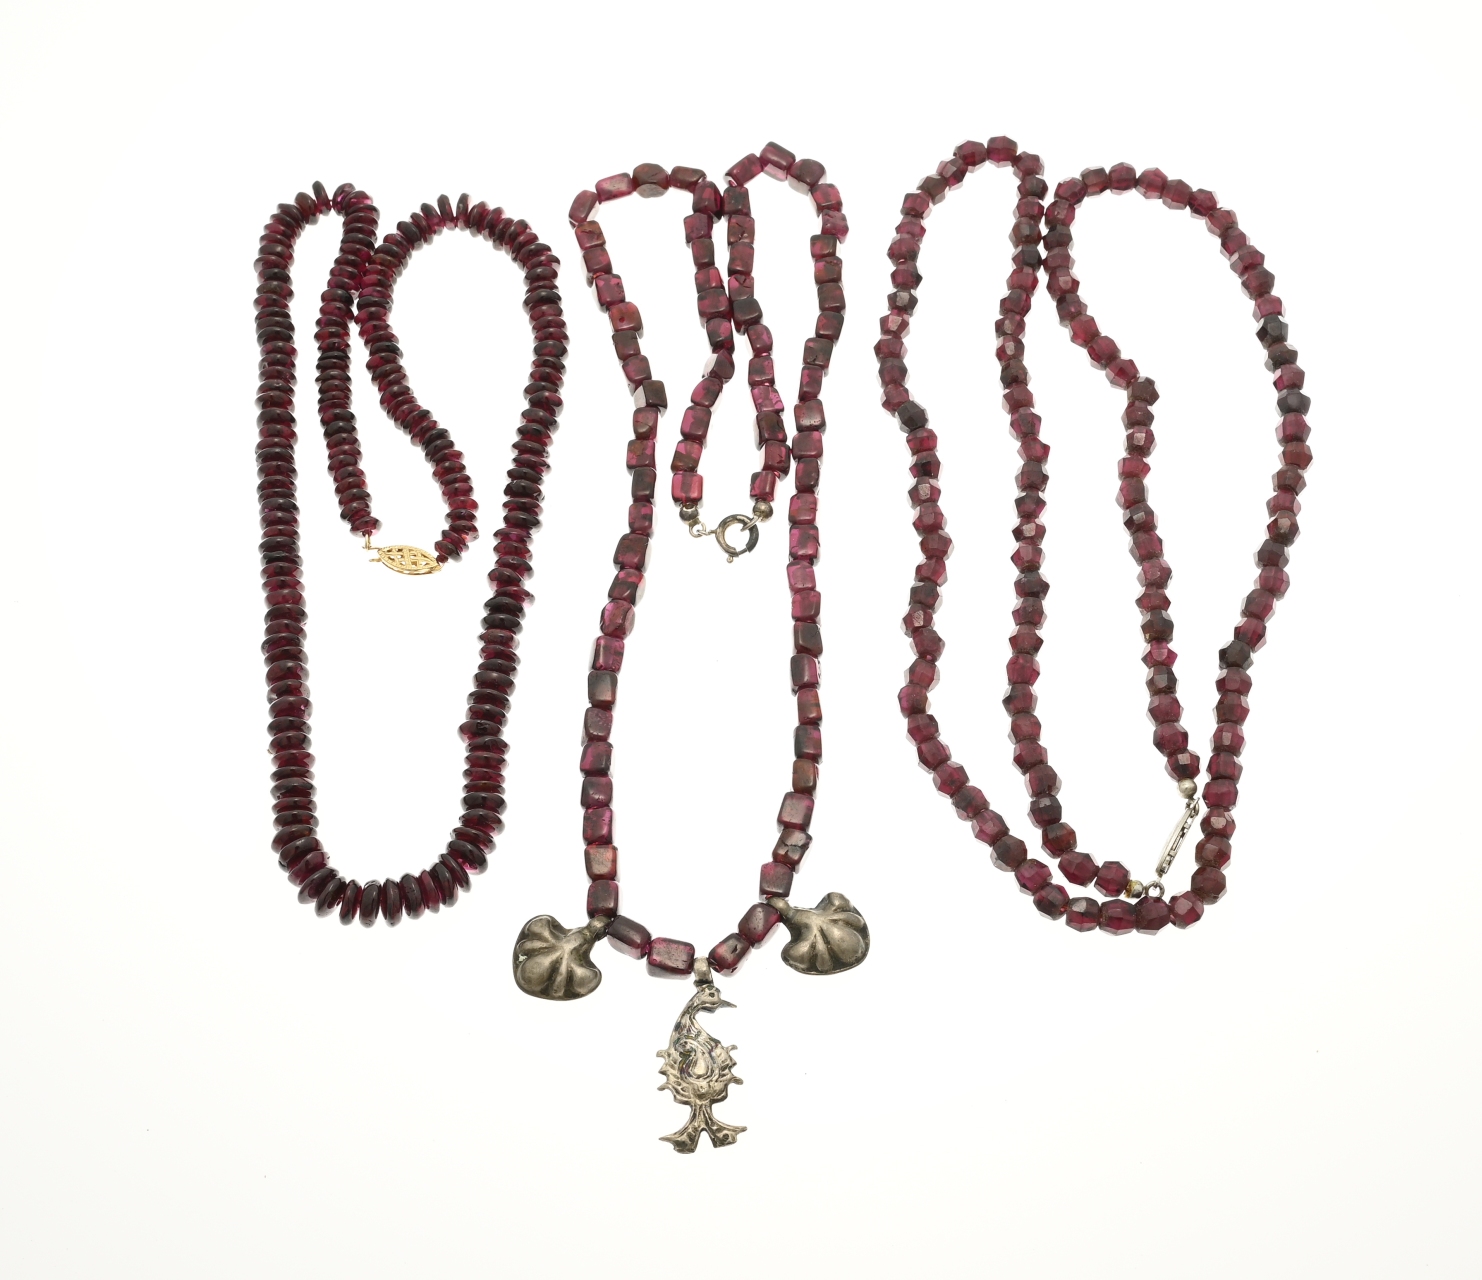 3 Necklaces with garnet